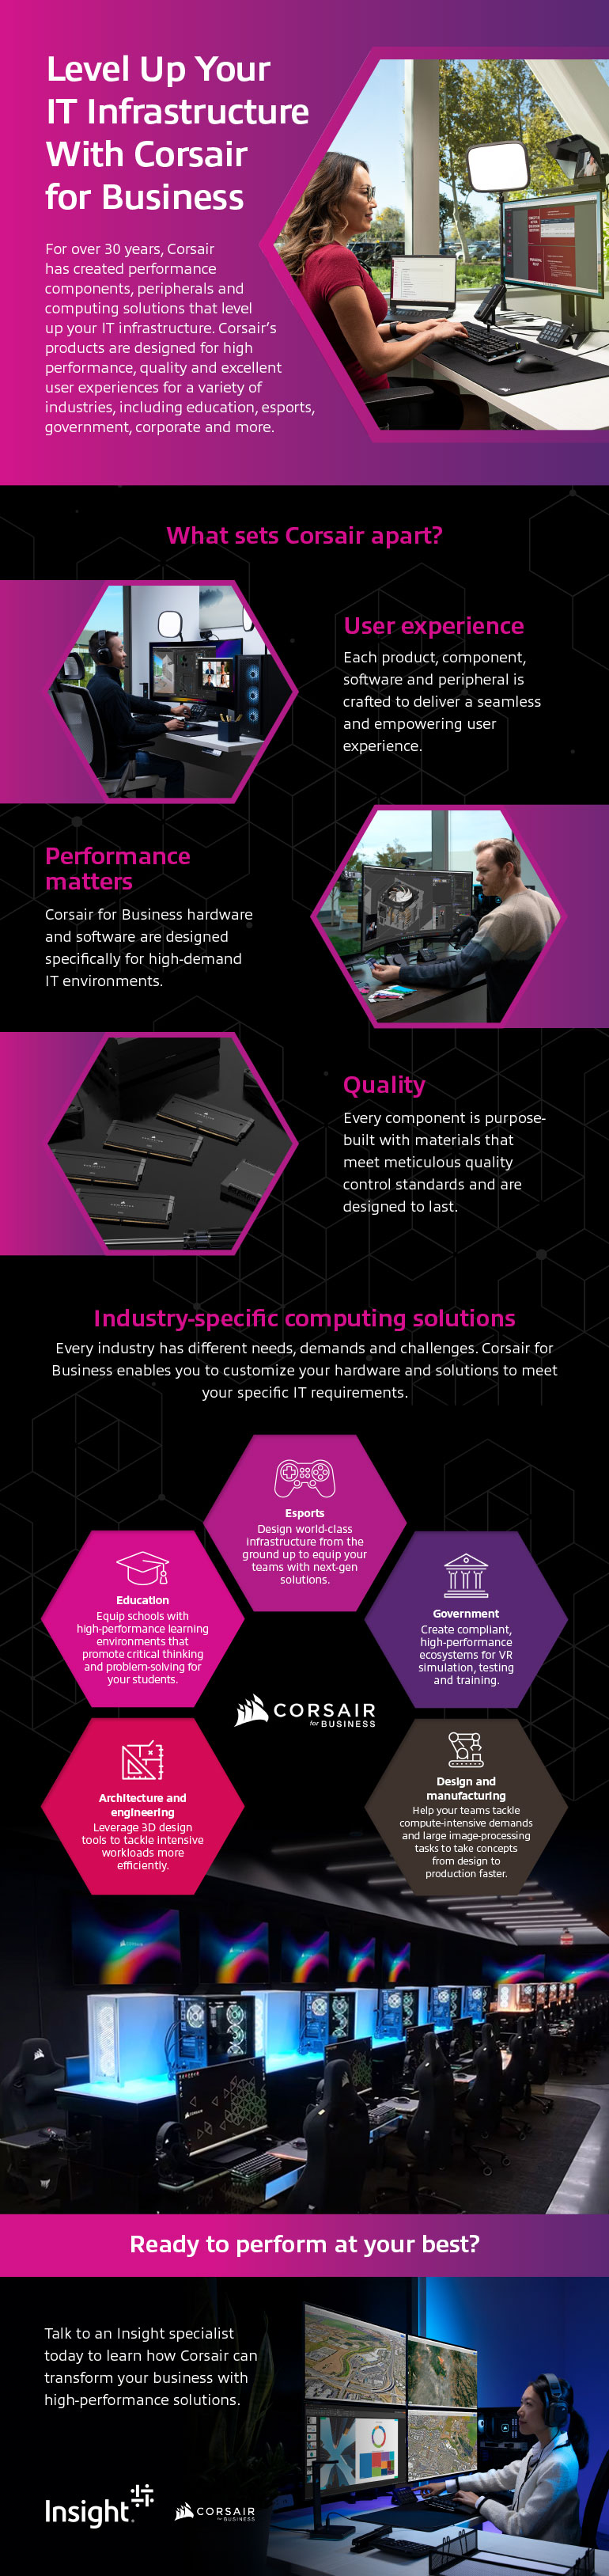 Level Up Your IT Infrastructure With Corsair for Business infographic as transcribed below